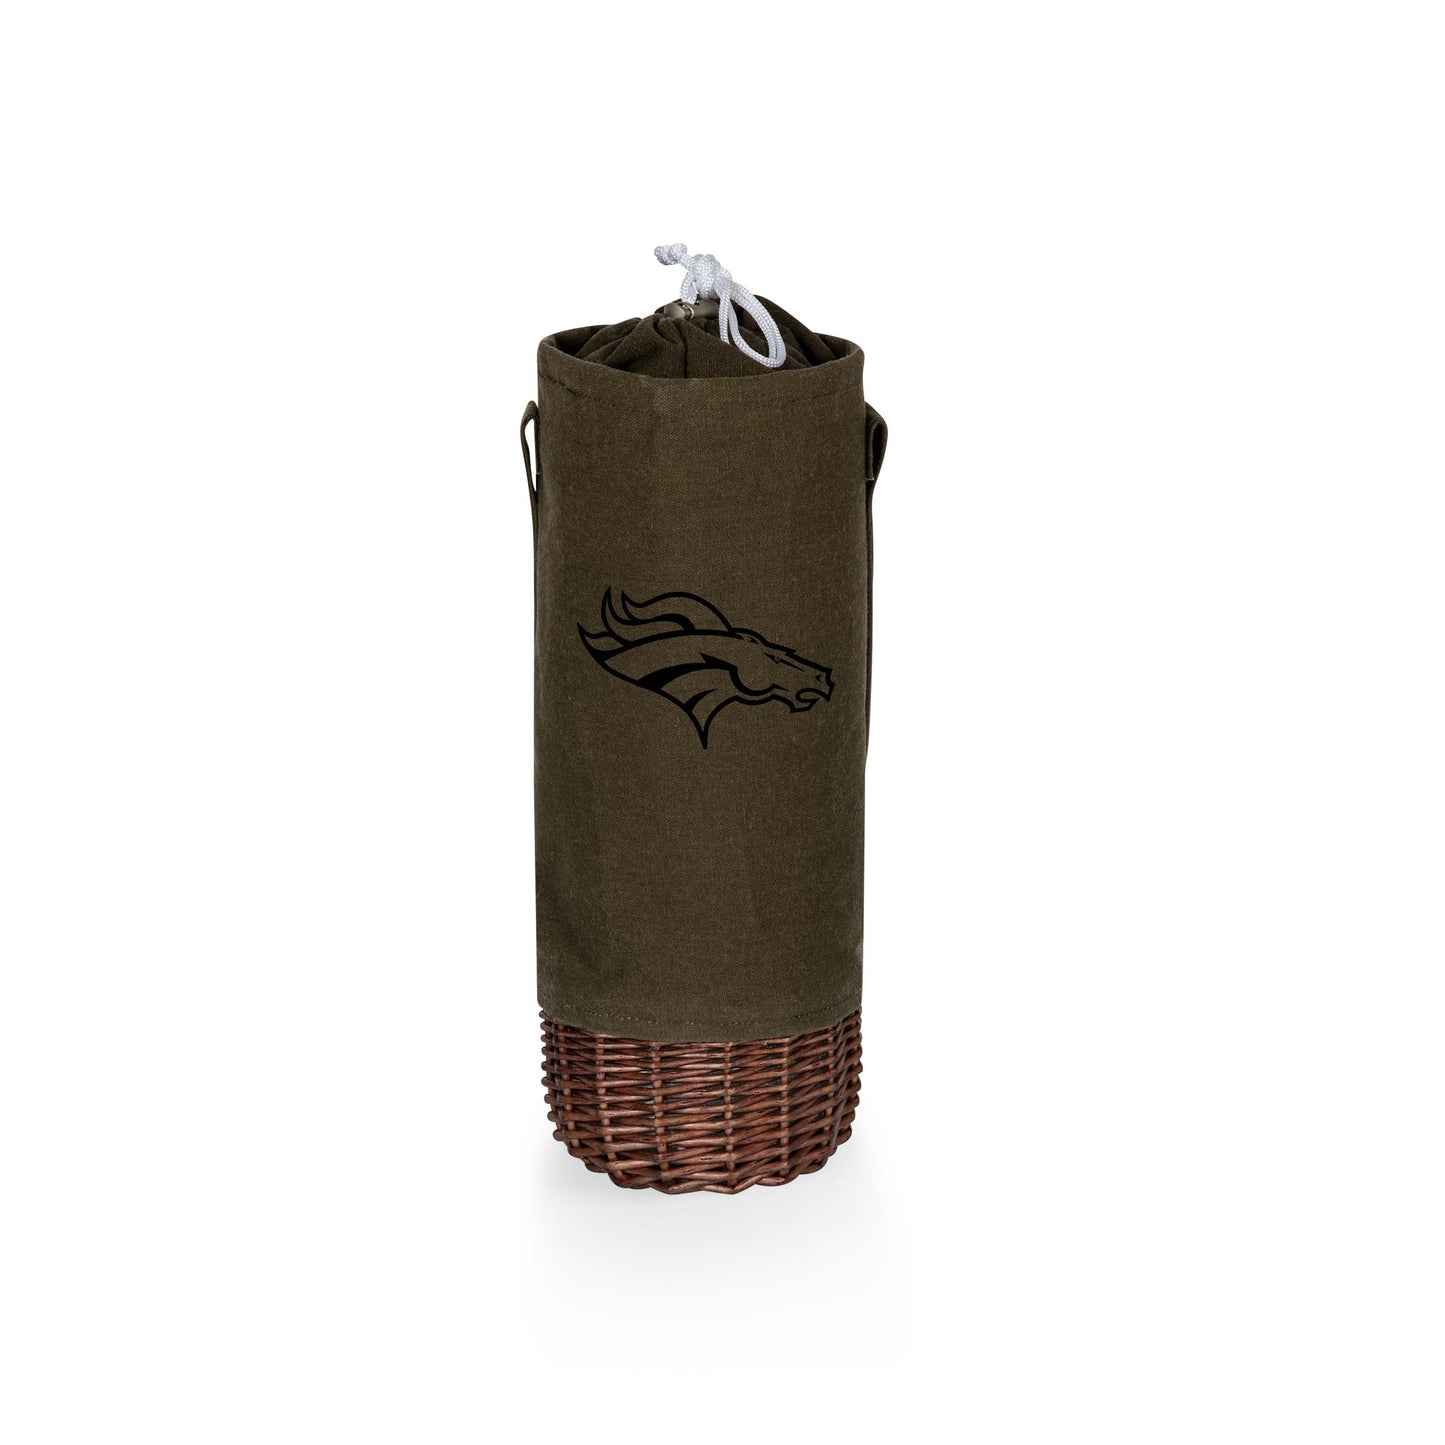 Denver Broncos - Malbec Insulated Canvas and Willow Wine Bottle Basket